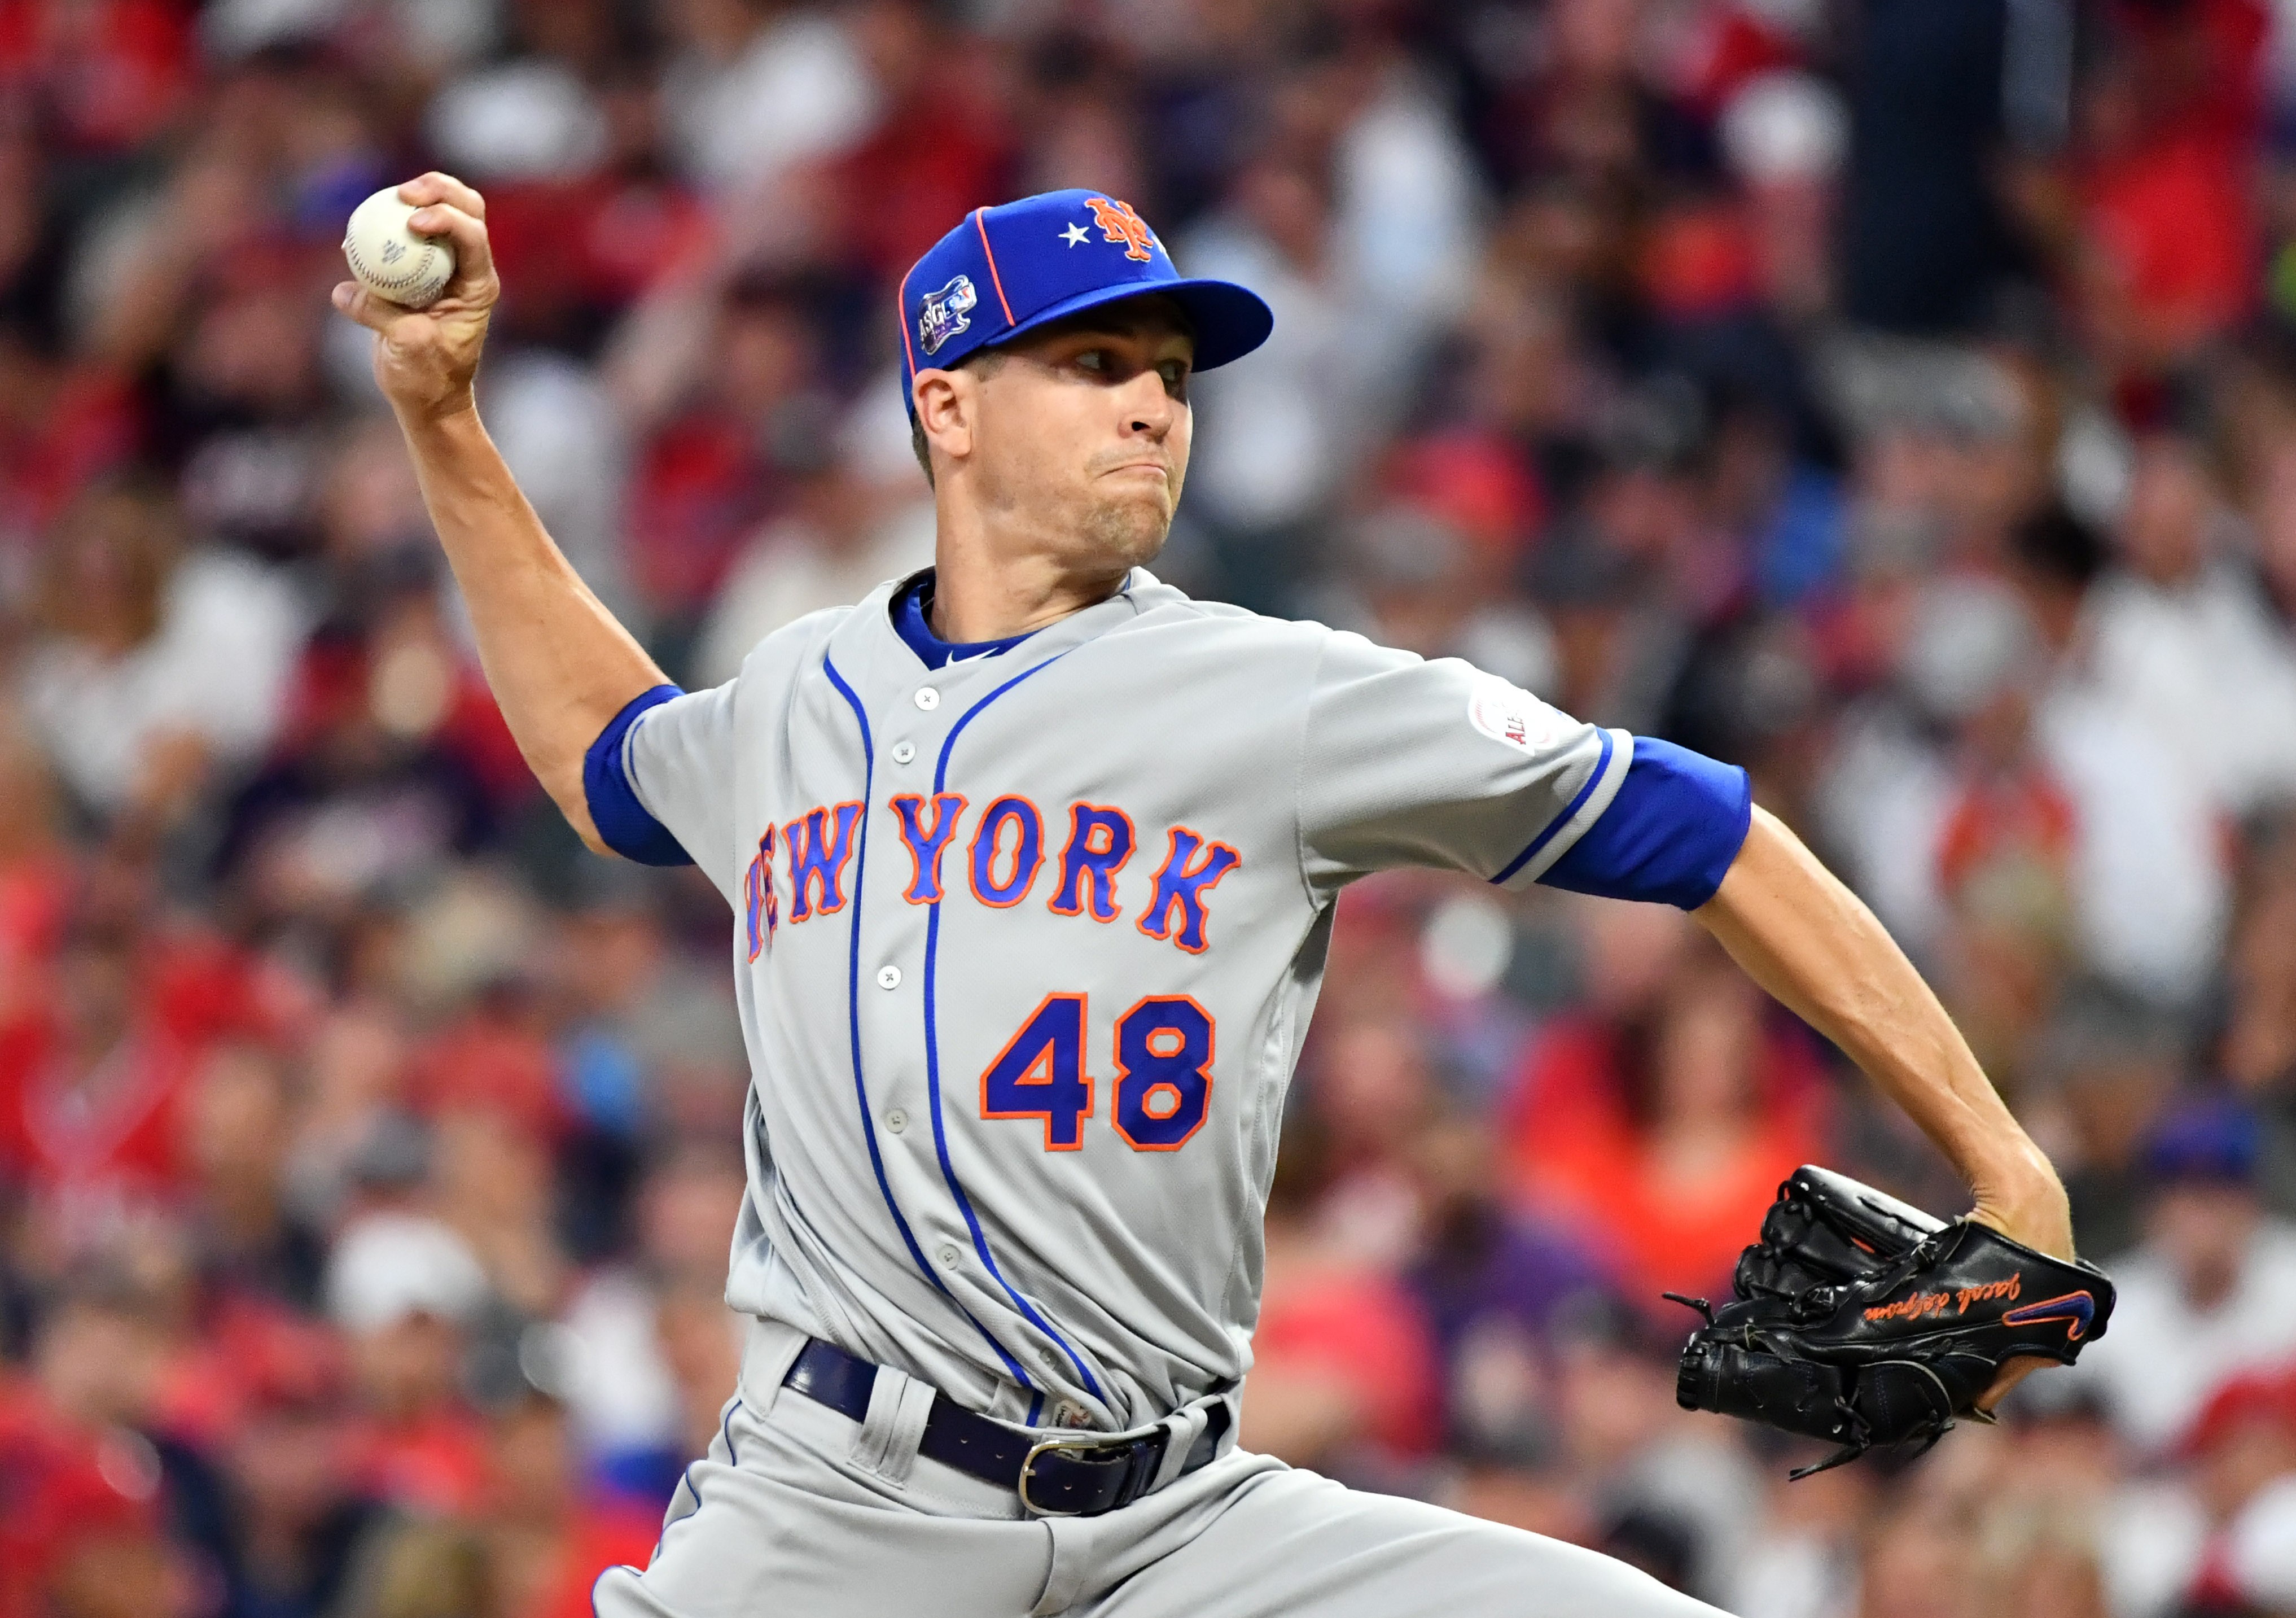 Jacob deGrom's Blue Jersey and Long Hair: A Winning Combination for the Mets - wide 4